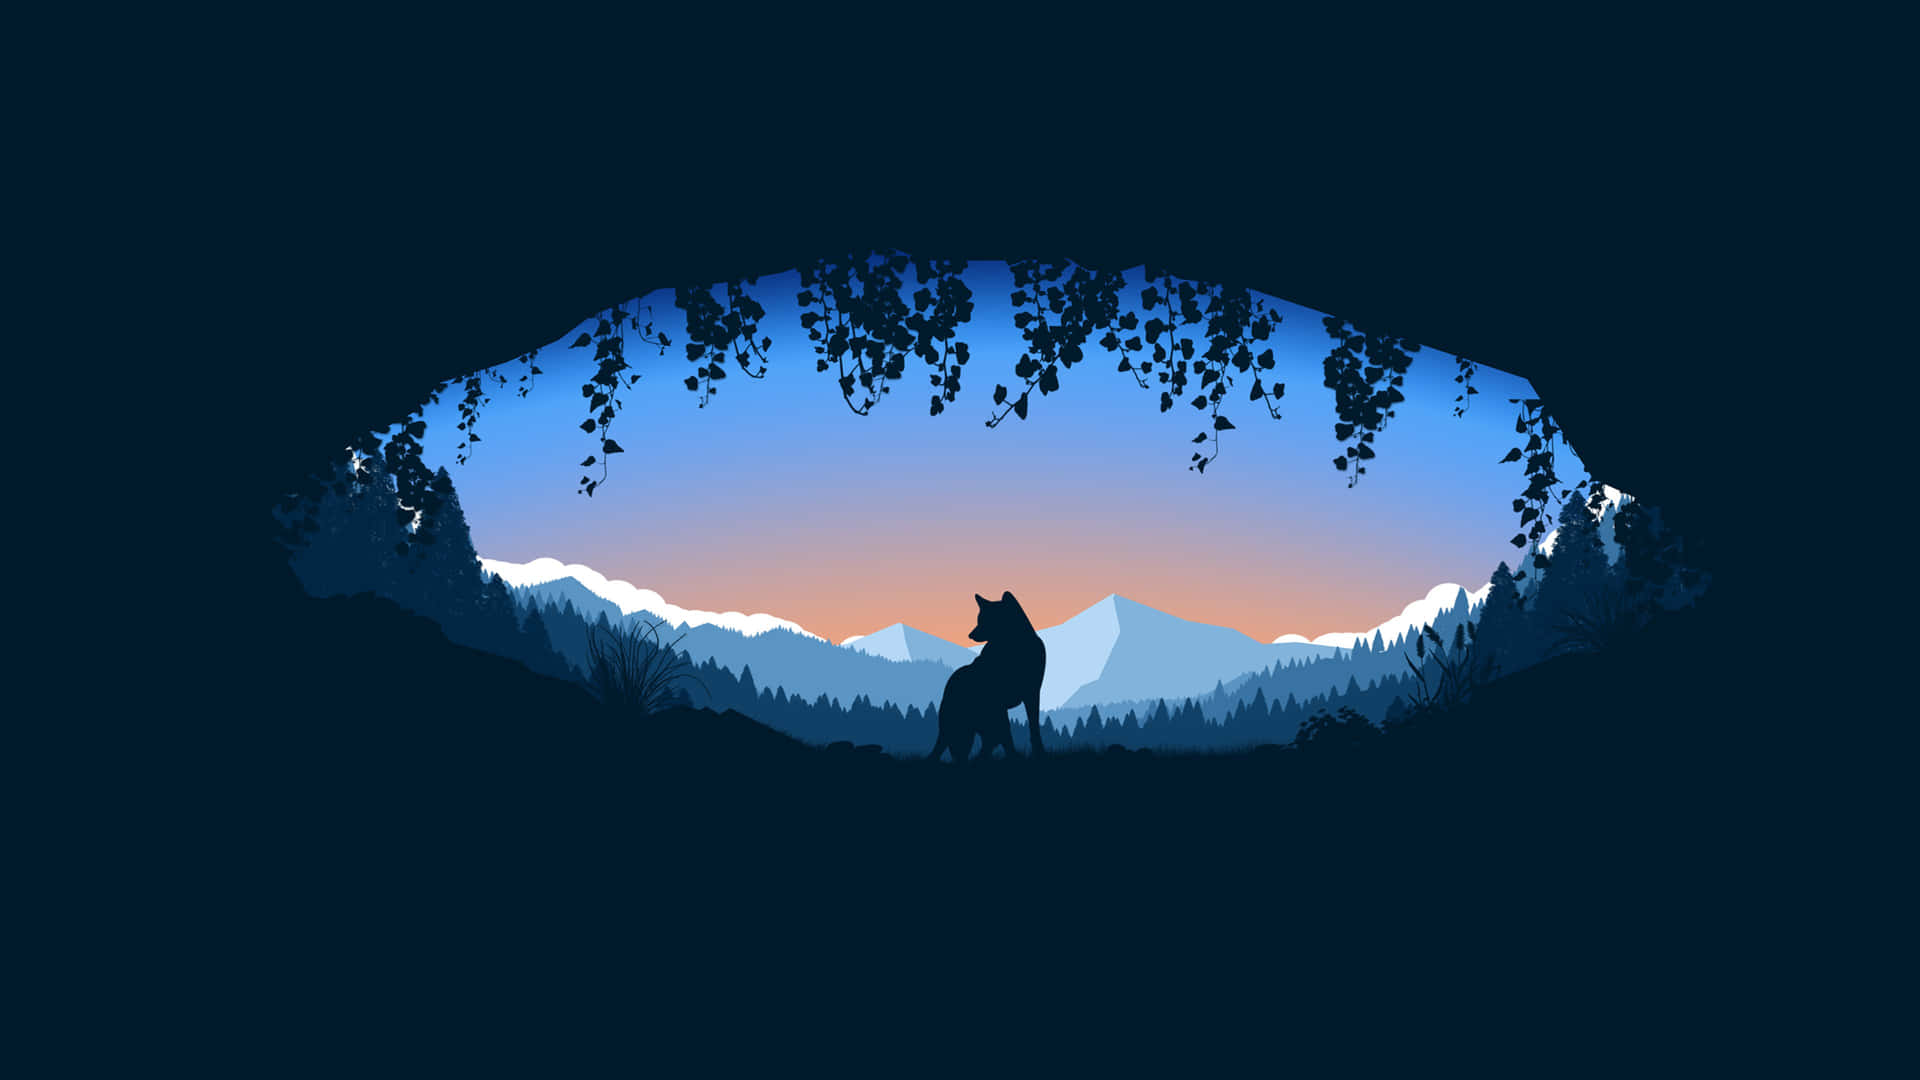 Howling in the Moonlight Wallpaper